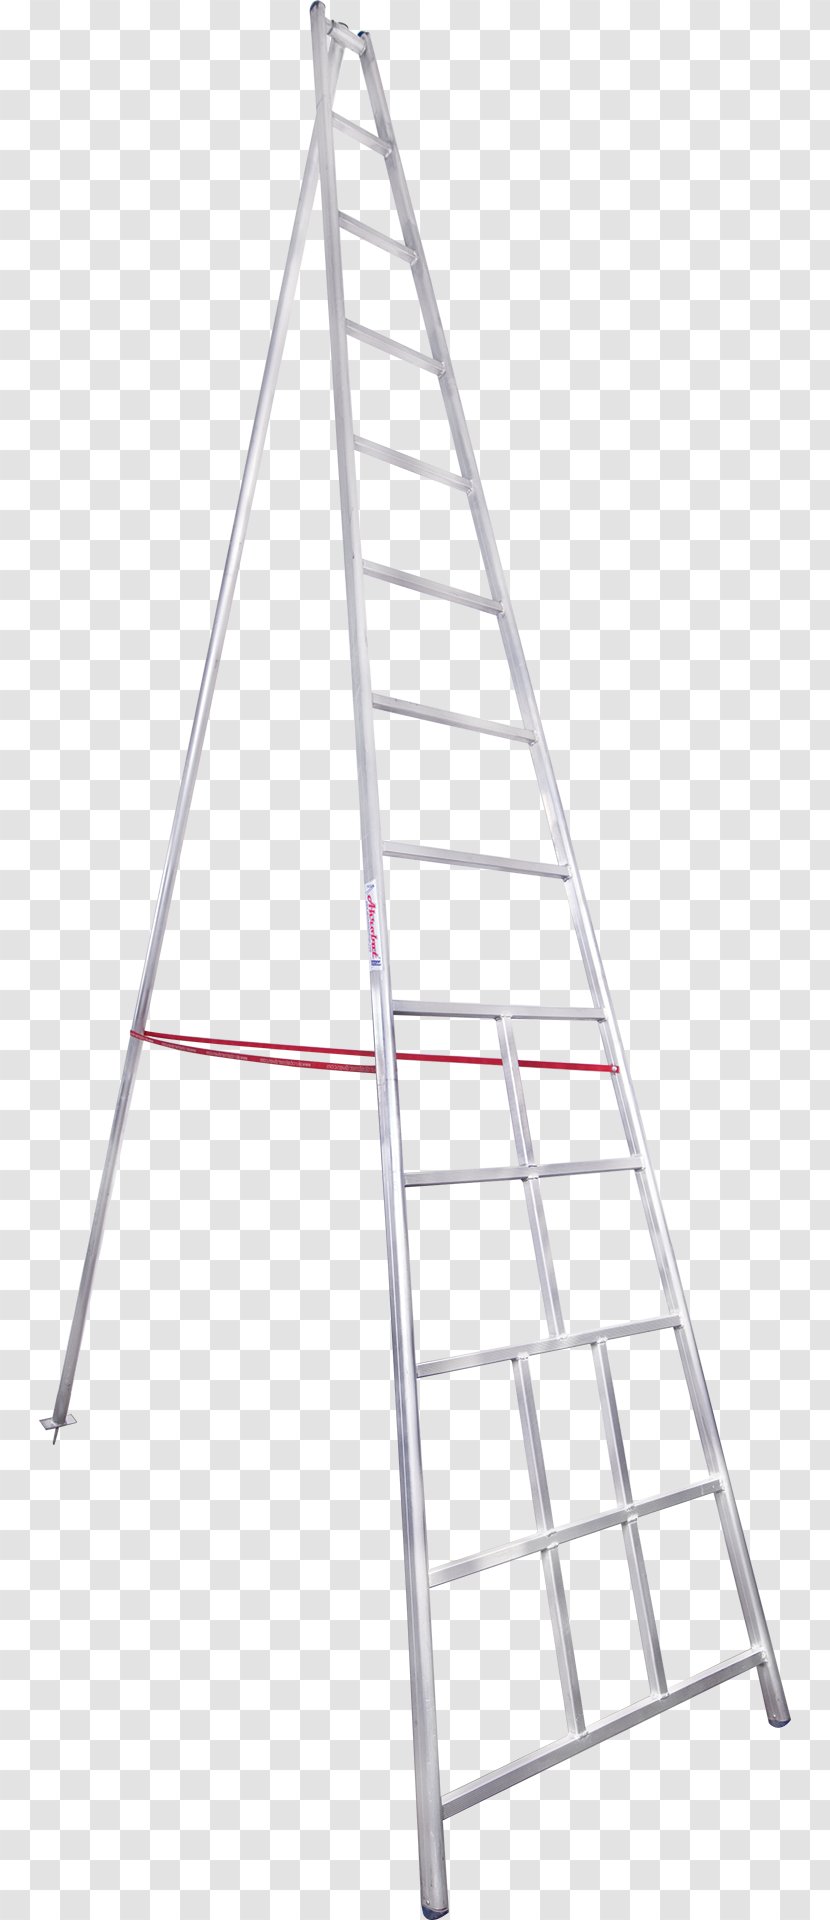 Ladder Stairs Foot Fruit Tree - Laos Transparent PNG